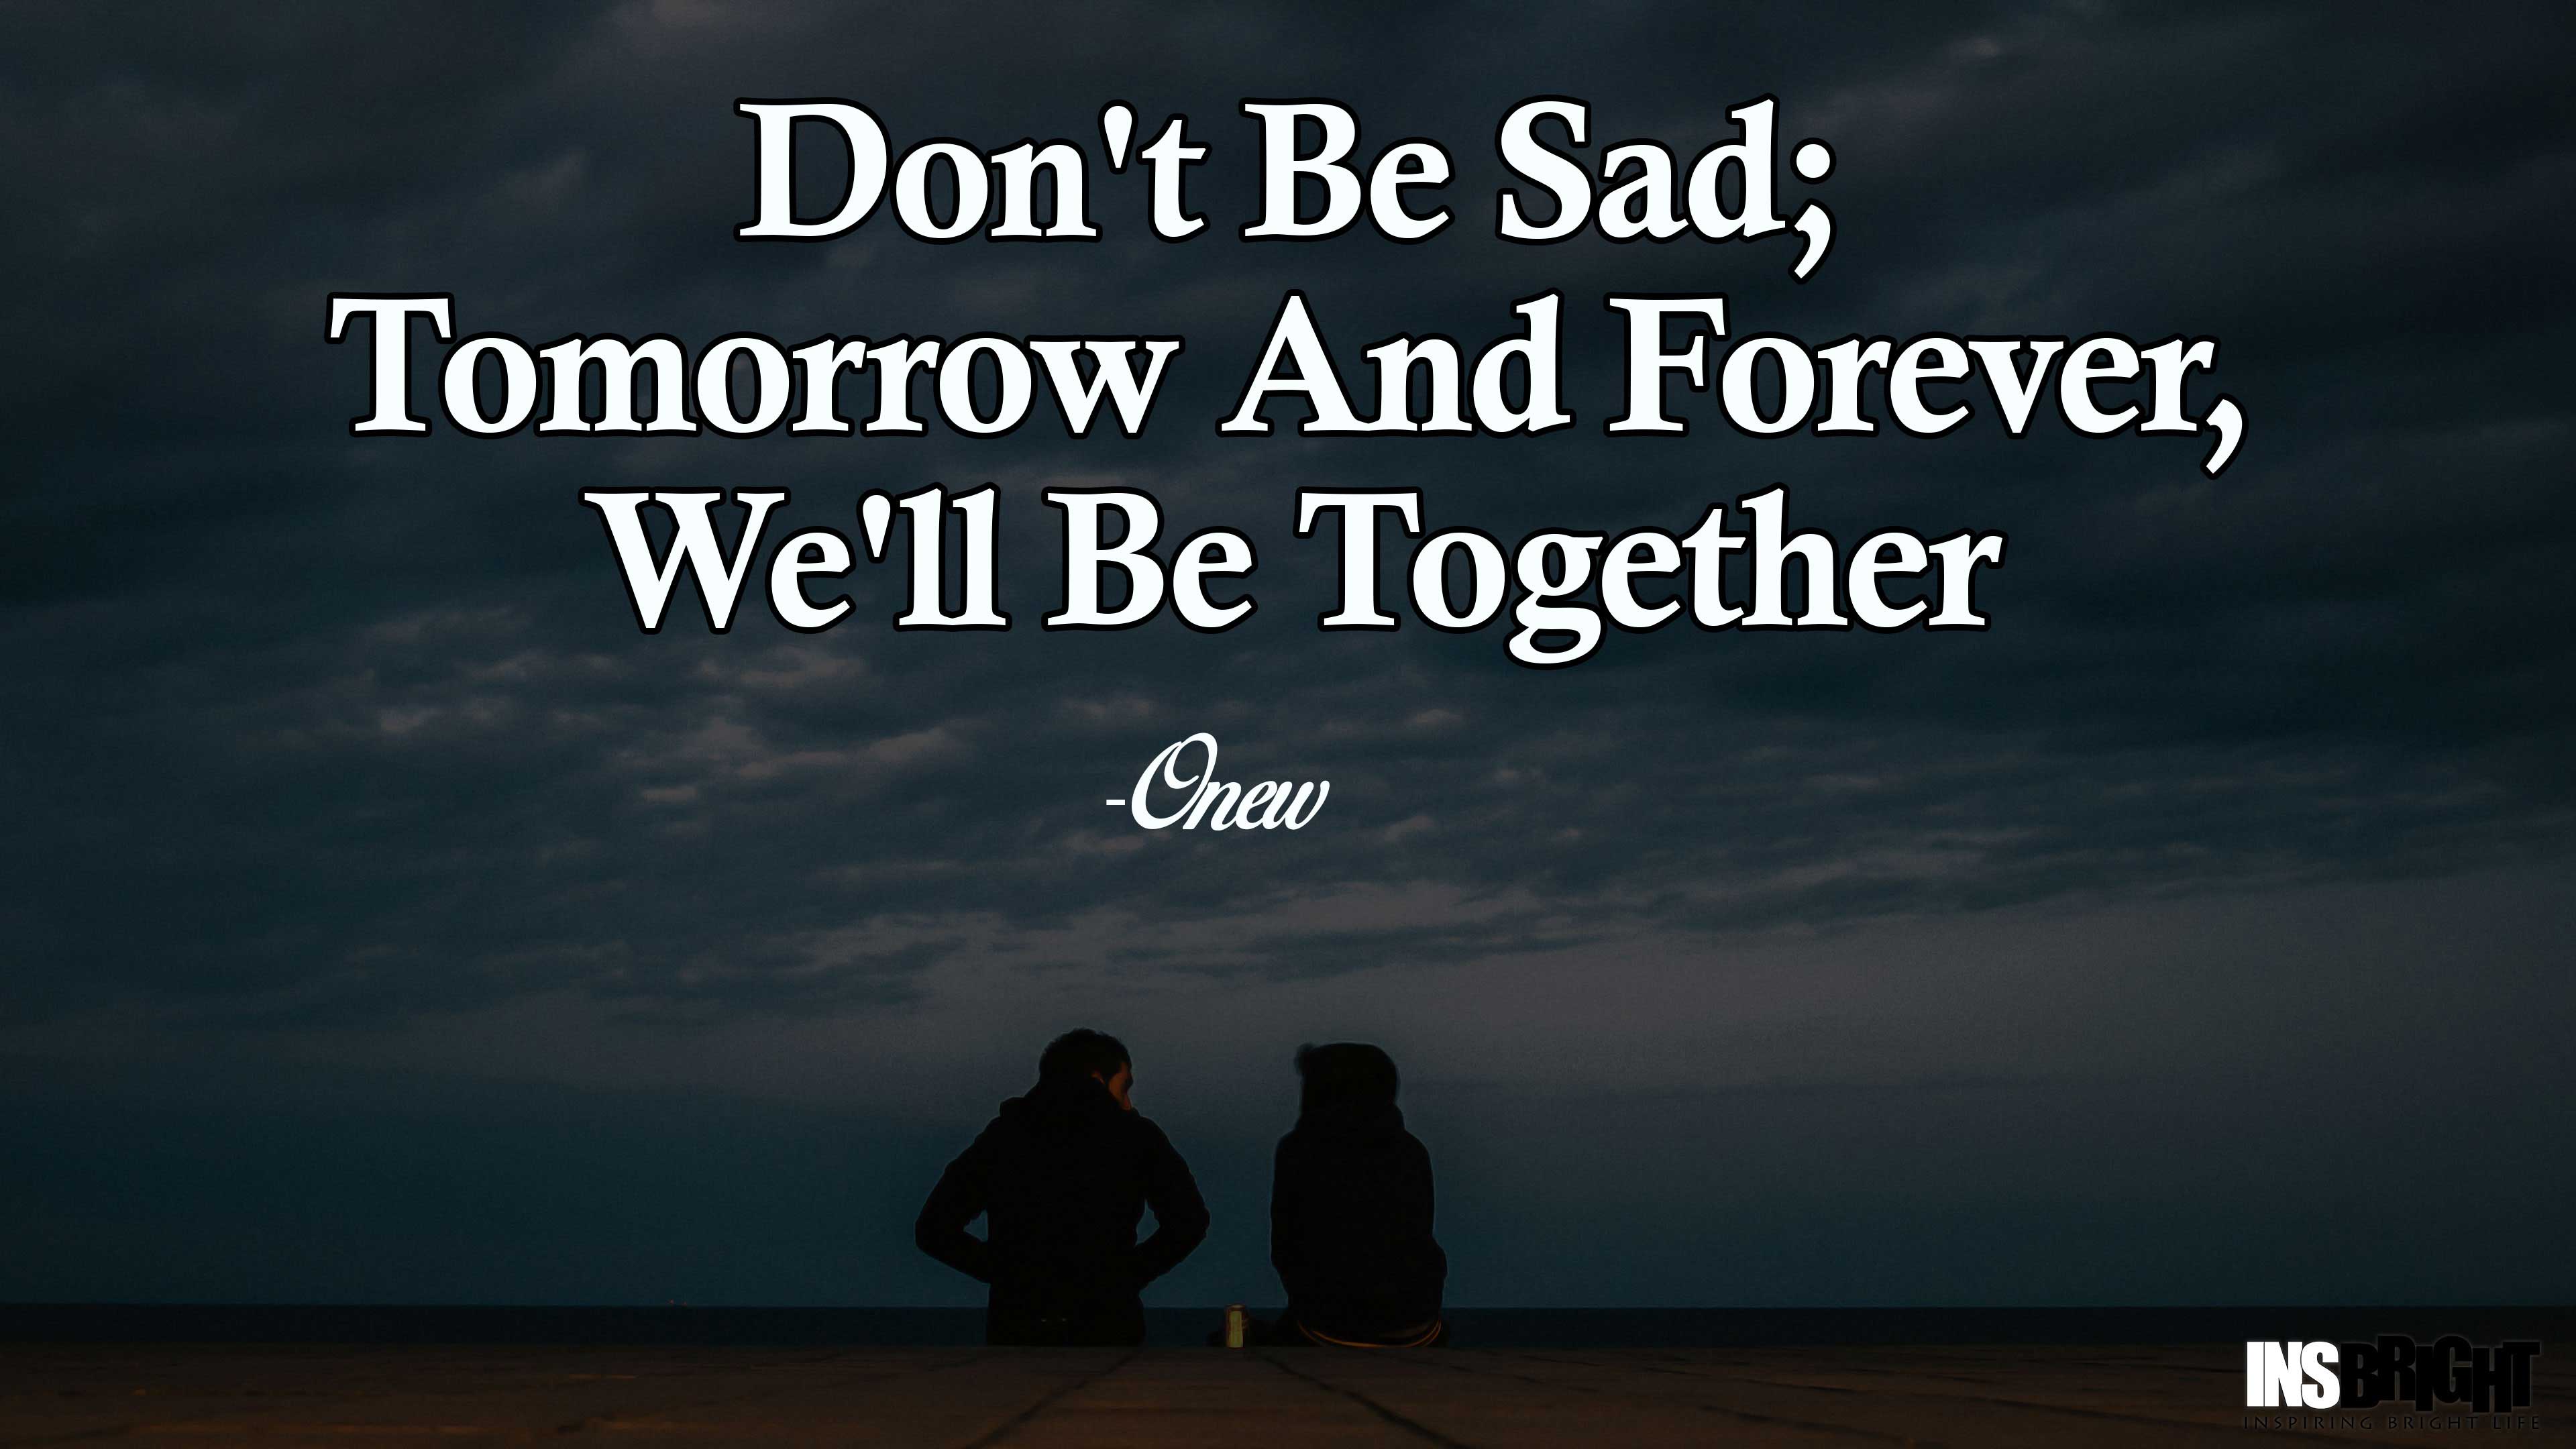 14+ Inspirational Don't Be Sad Quotes Images | Insbright